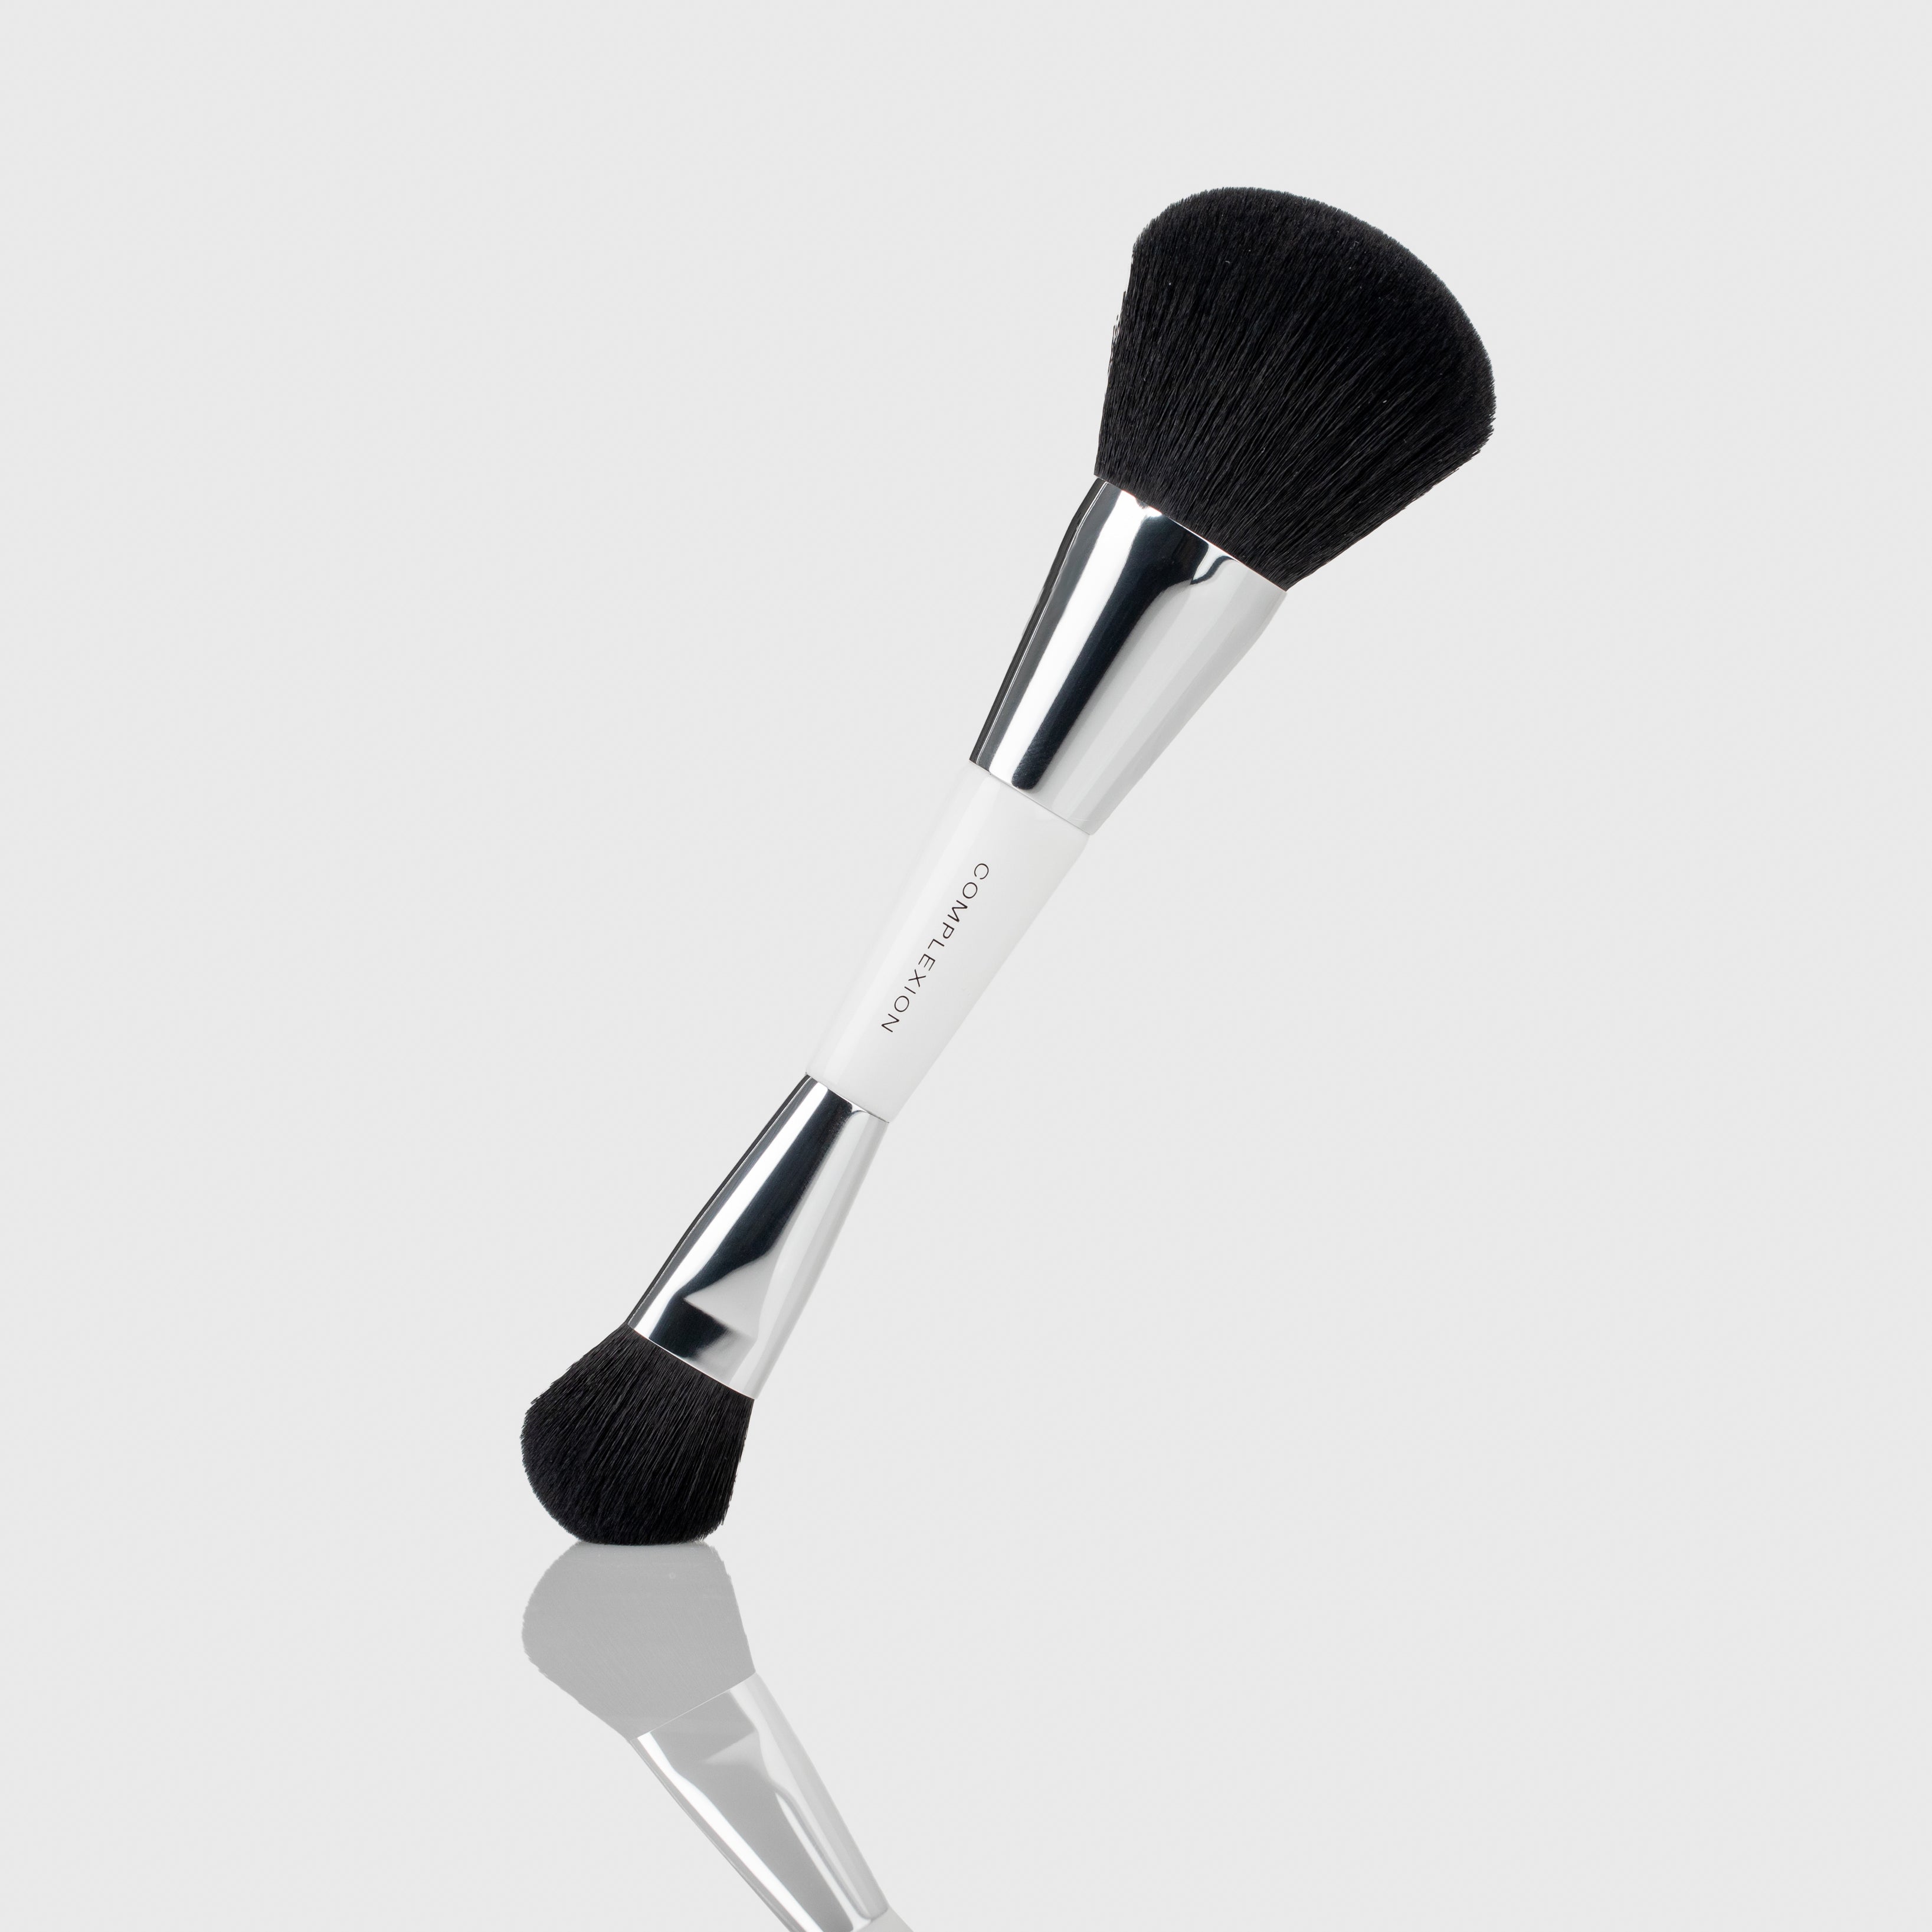 Two sided complexion foundation brush with one larger and densely packed head and one fluffy small end with silver accents